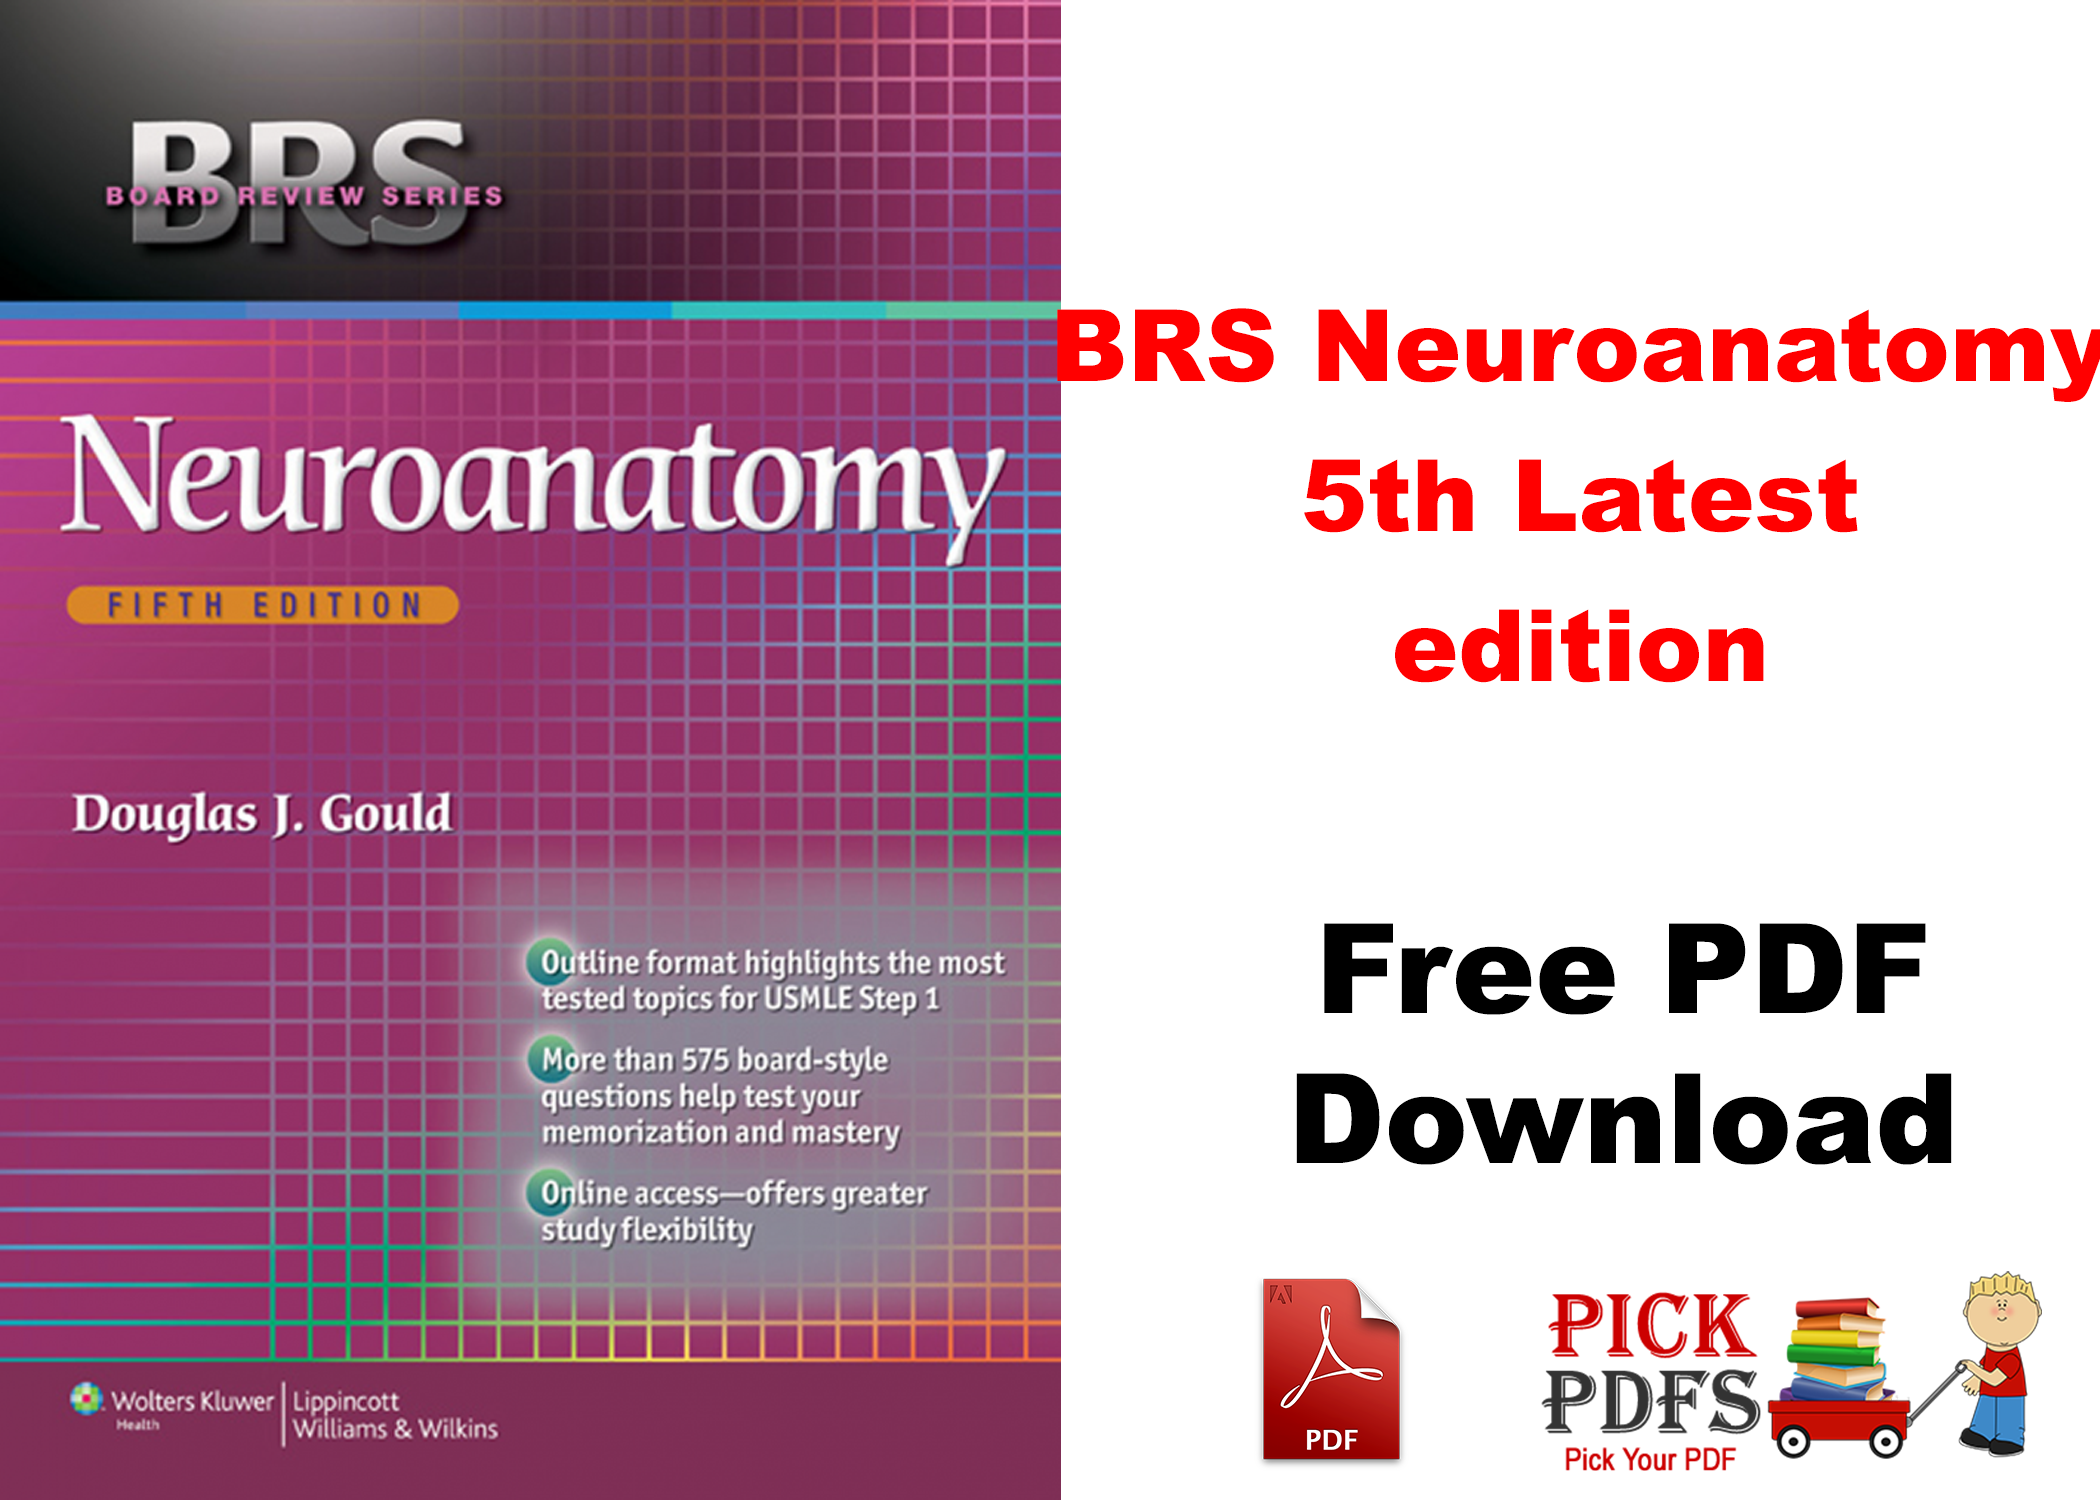 https://pickpdfs.com/download-neurocritical-care-management-of-the-neurosurgical-patients-pdf-free2021/